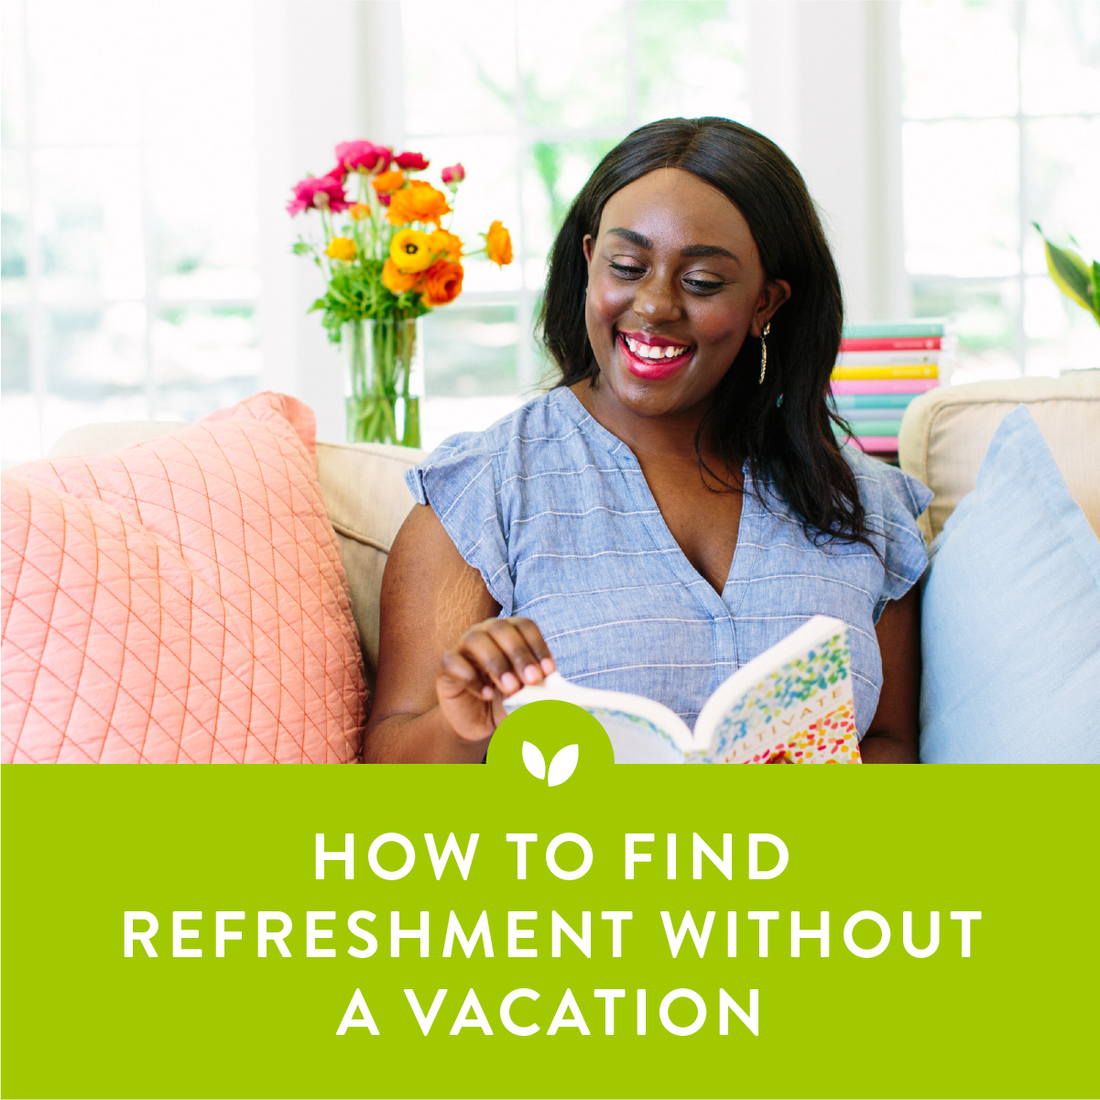 How to Find Refreshment Without a Vacation